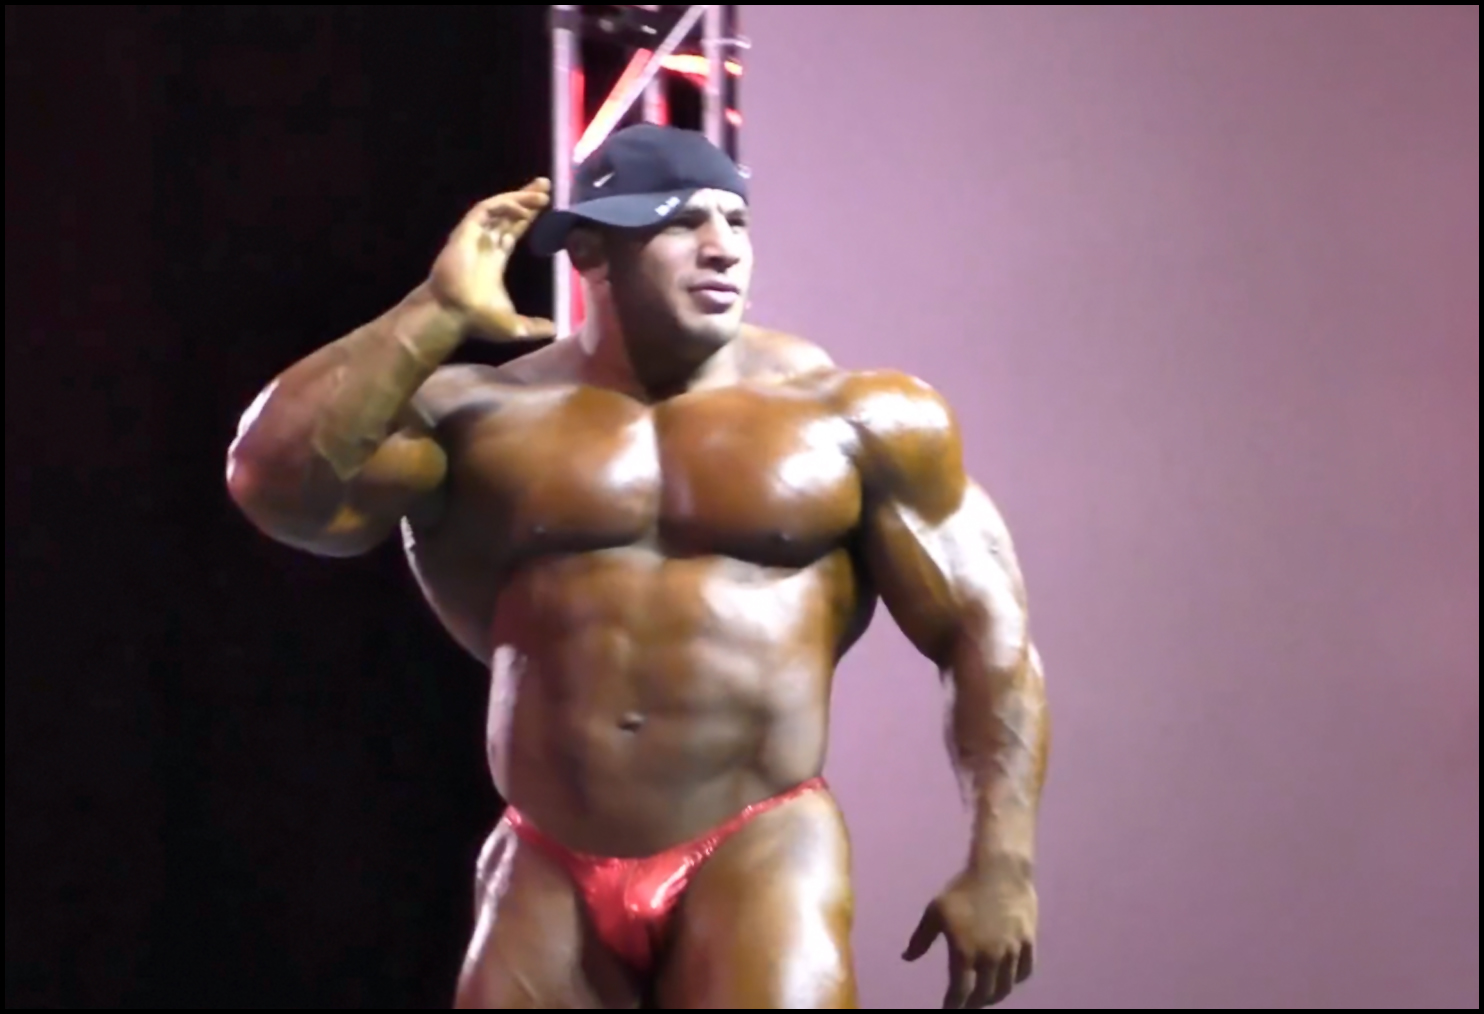 EGYPTIAN MUSCLE (...GOTTA FAT DICK IN THAT THONG)